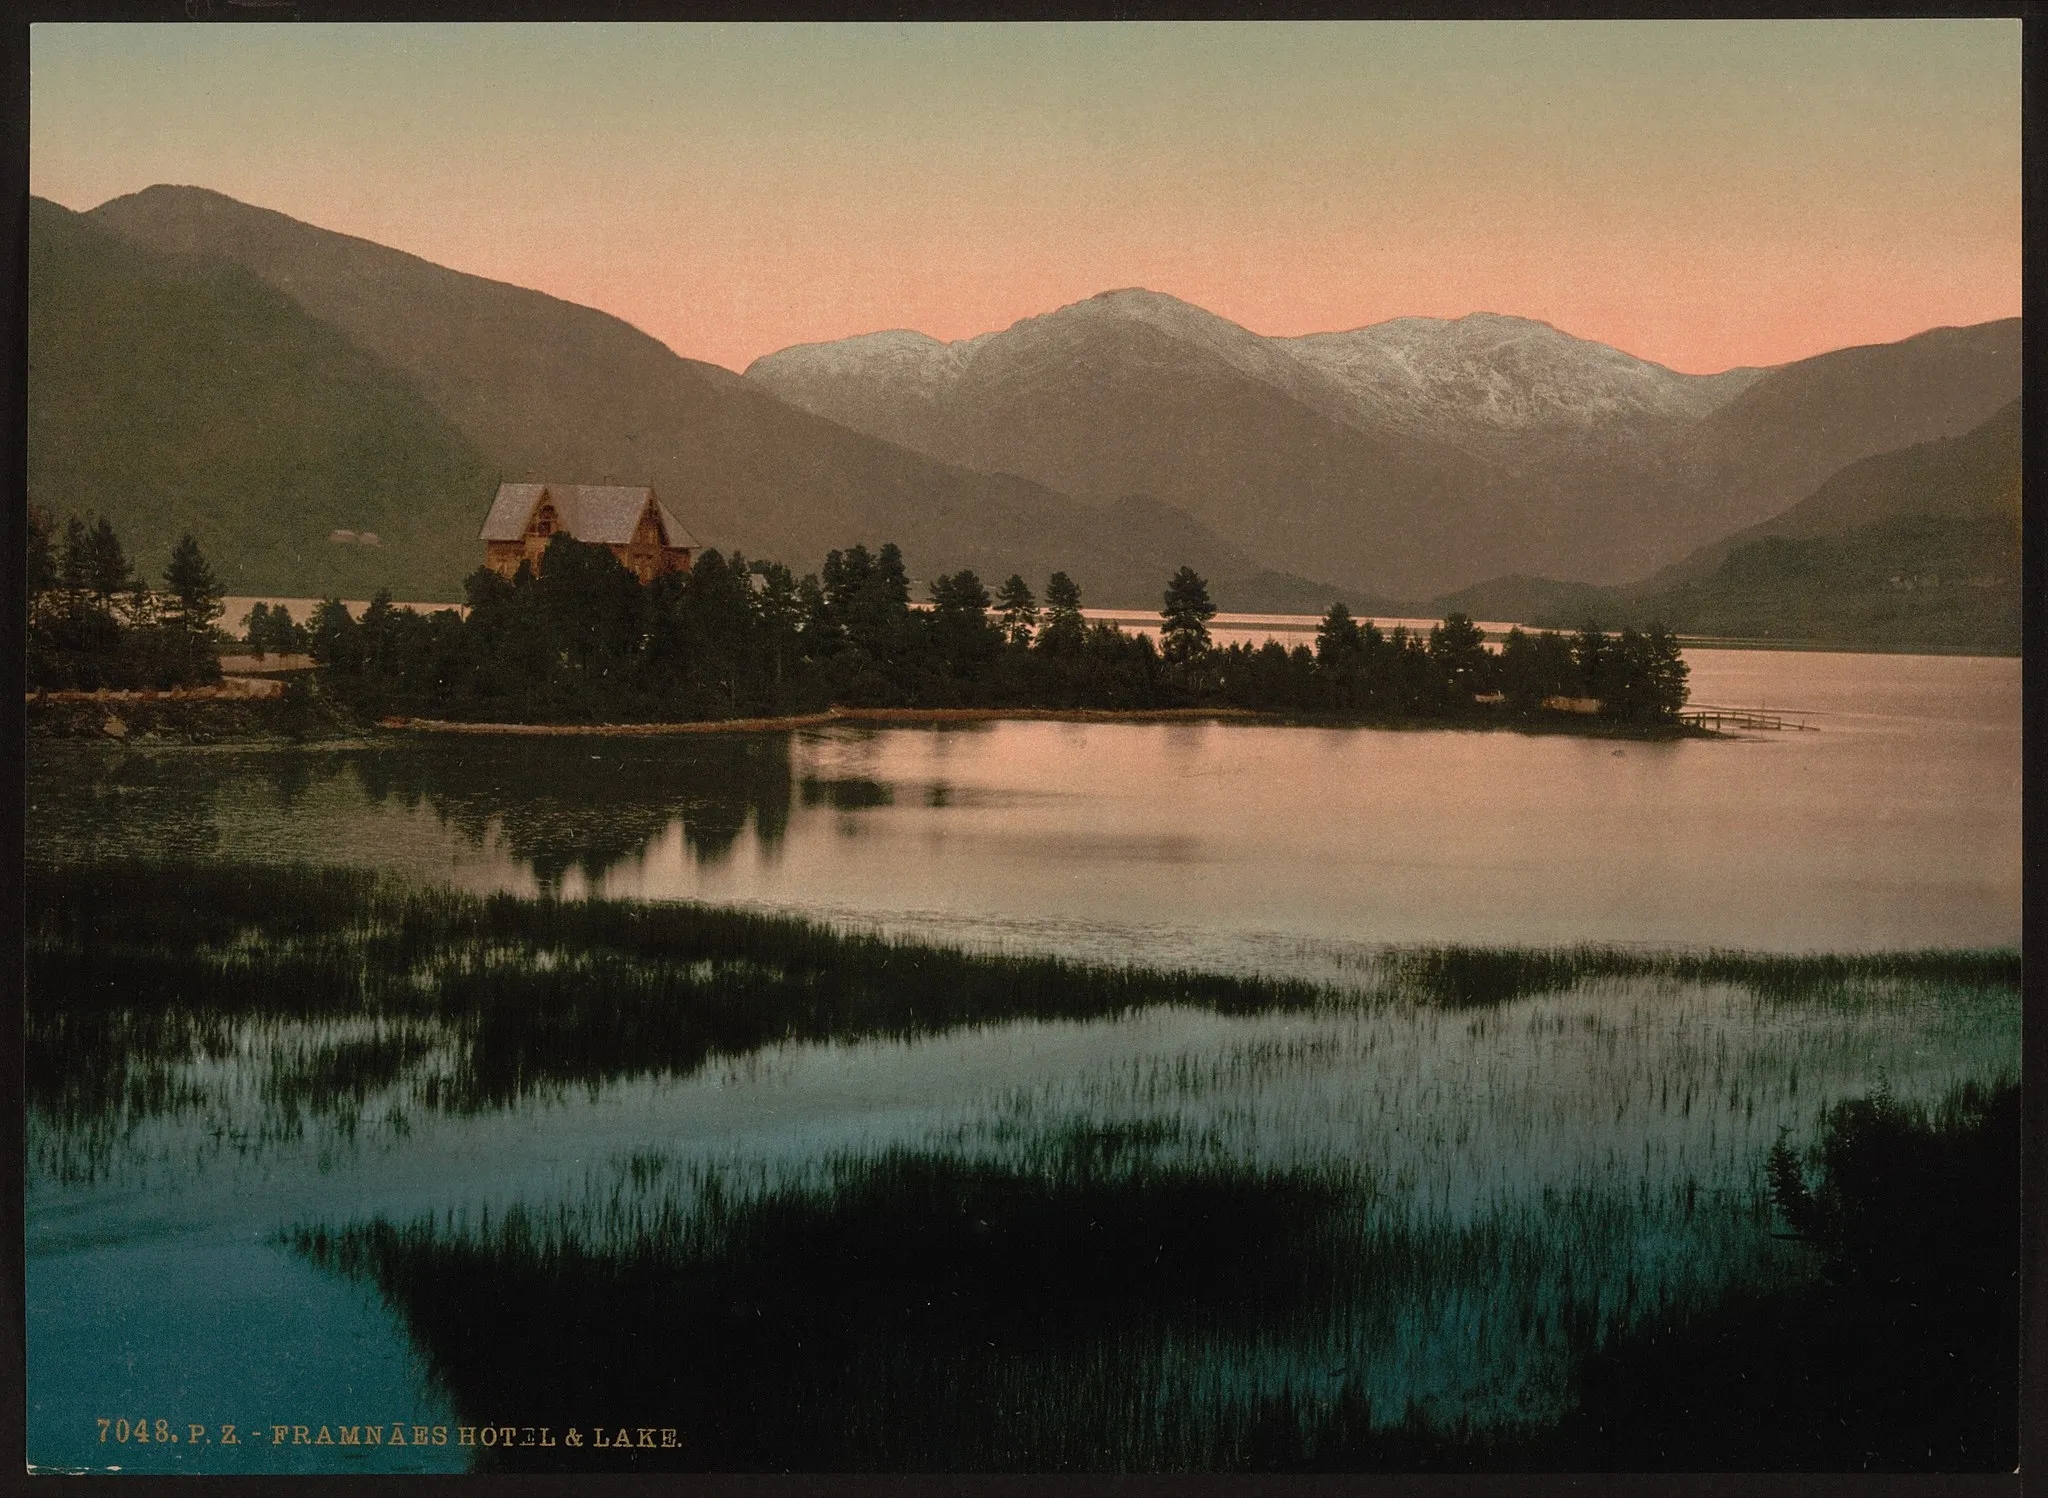 Photo showing: Print shows the Framnaes Hotel on Oppheimsvannet (Oppheim Lake), near Voss, Norway. (Source: Flickr Commons project, 2009)